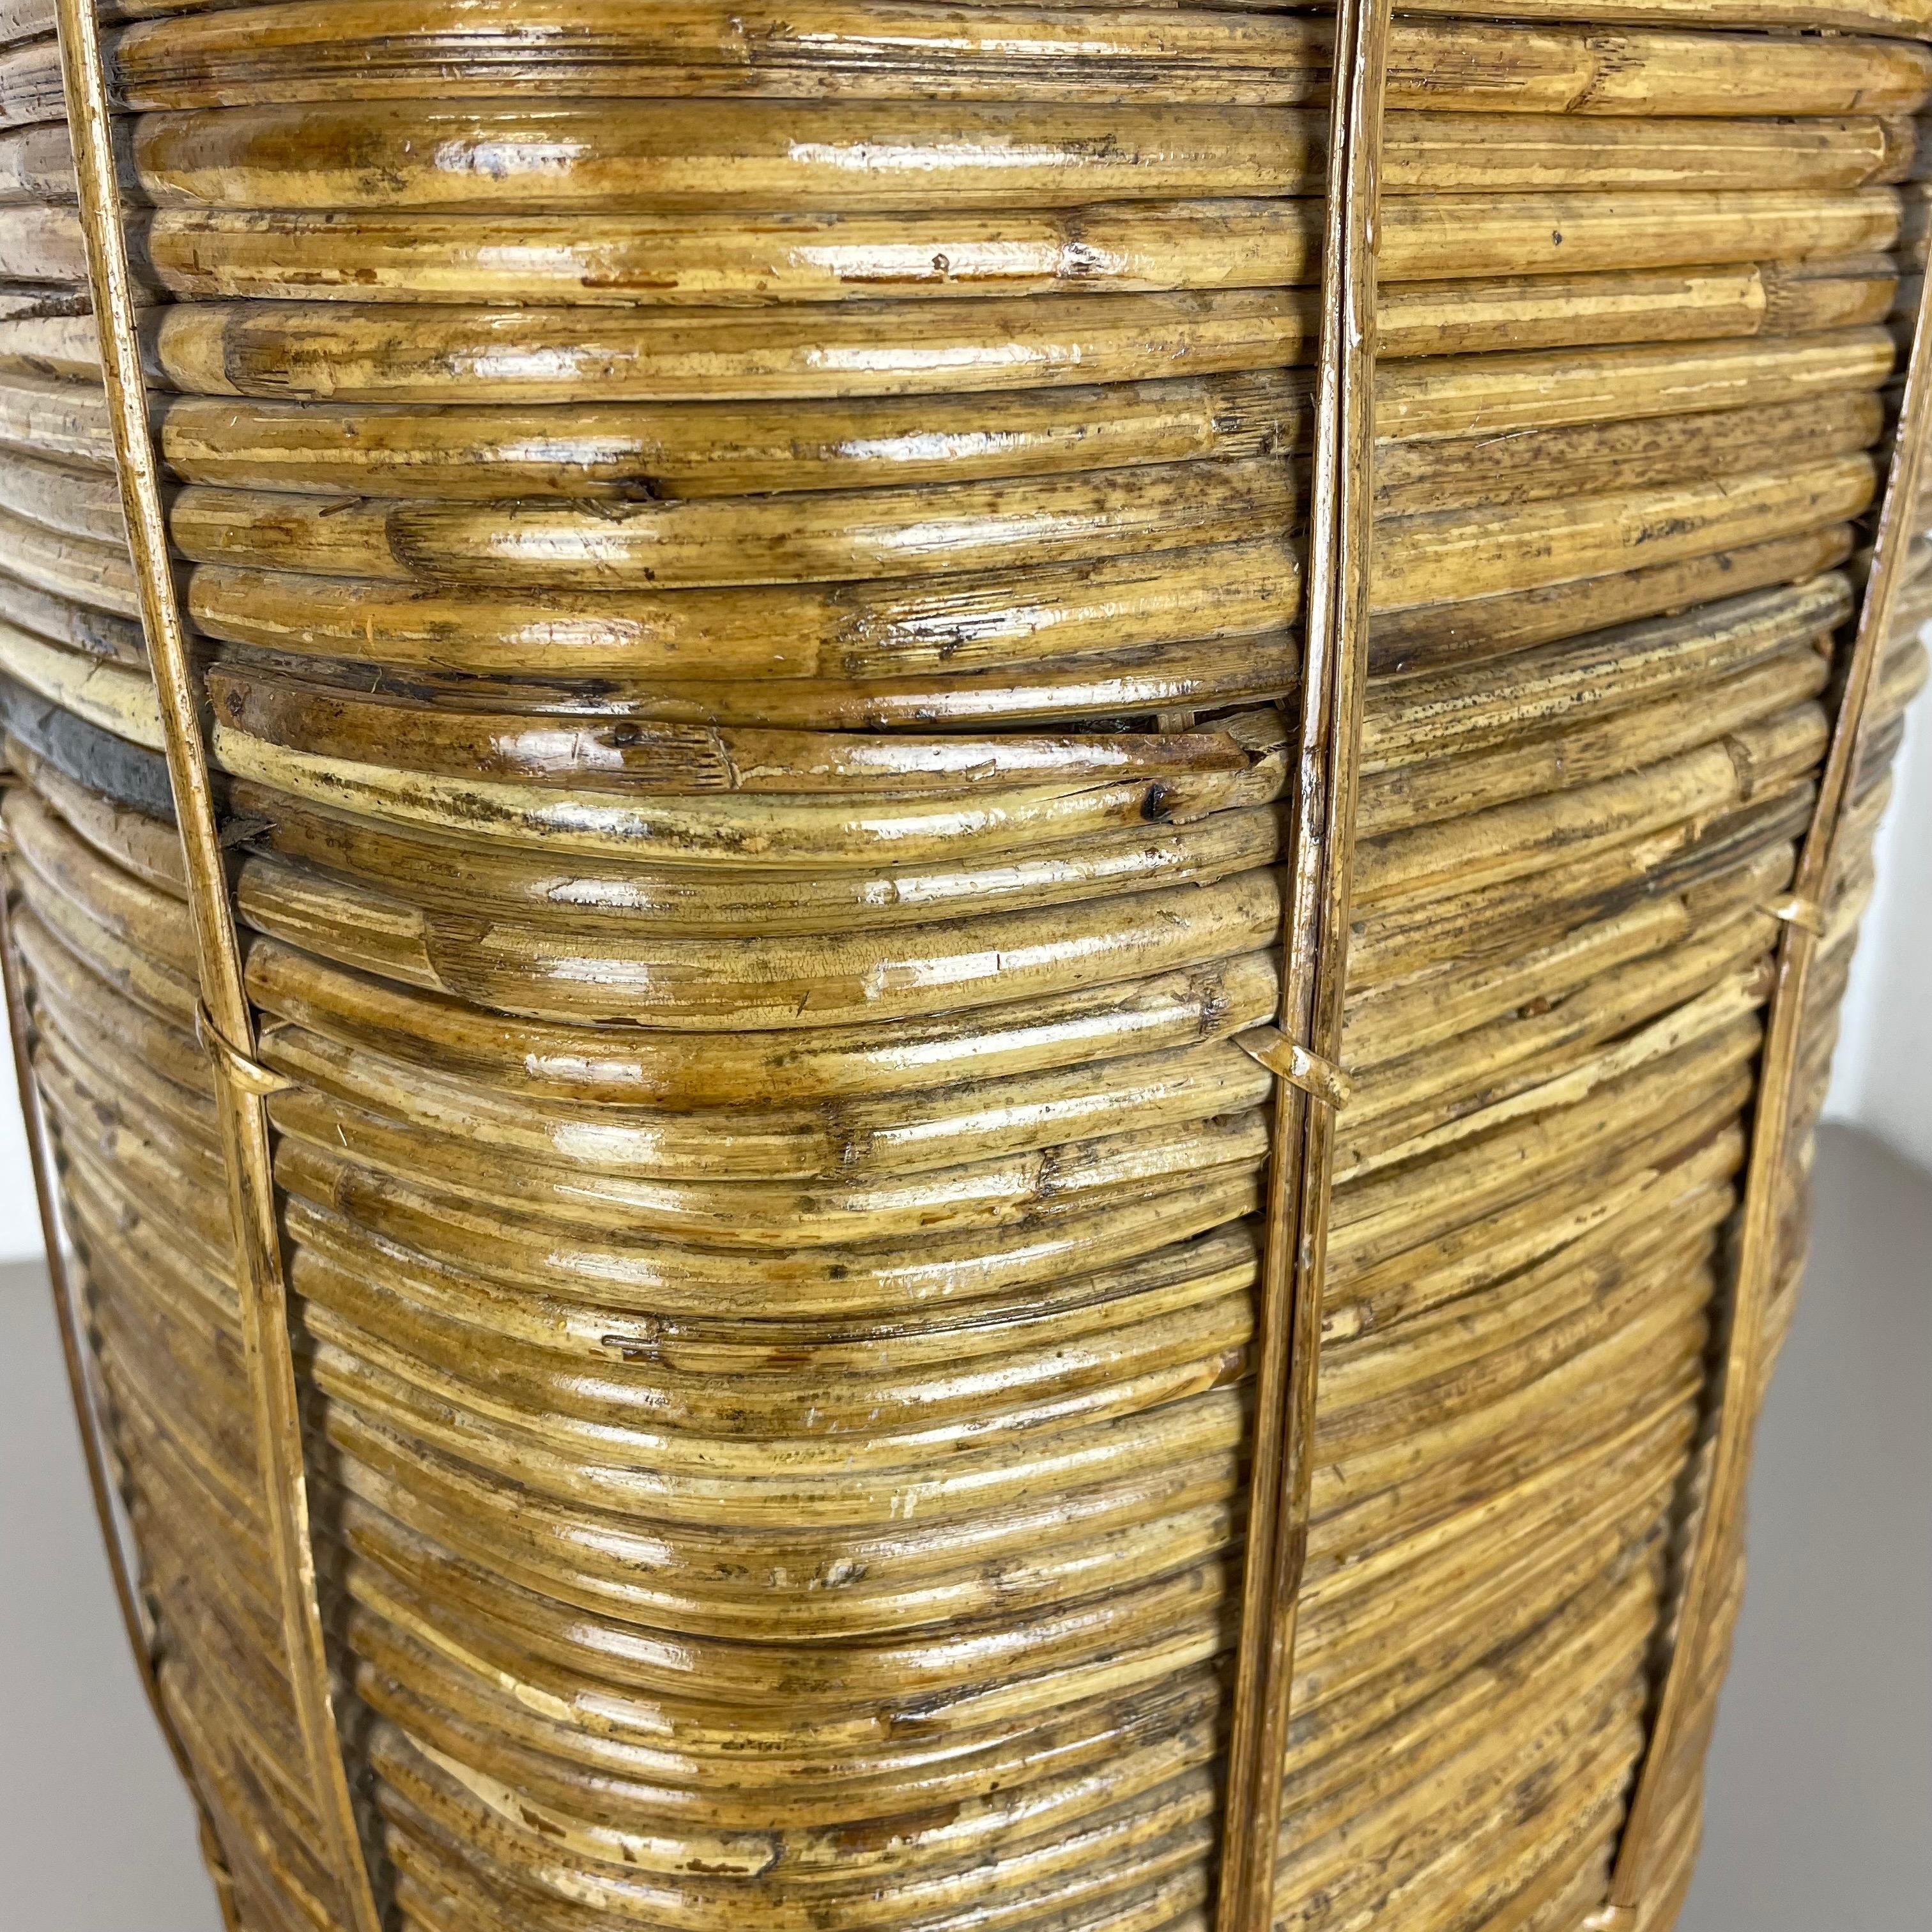 Aubock Style Rattan and Brass Bauhaus Waste Bin, Umbrella Stand, France, 1960s For Sale 7